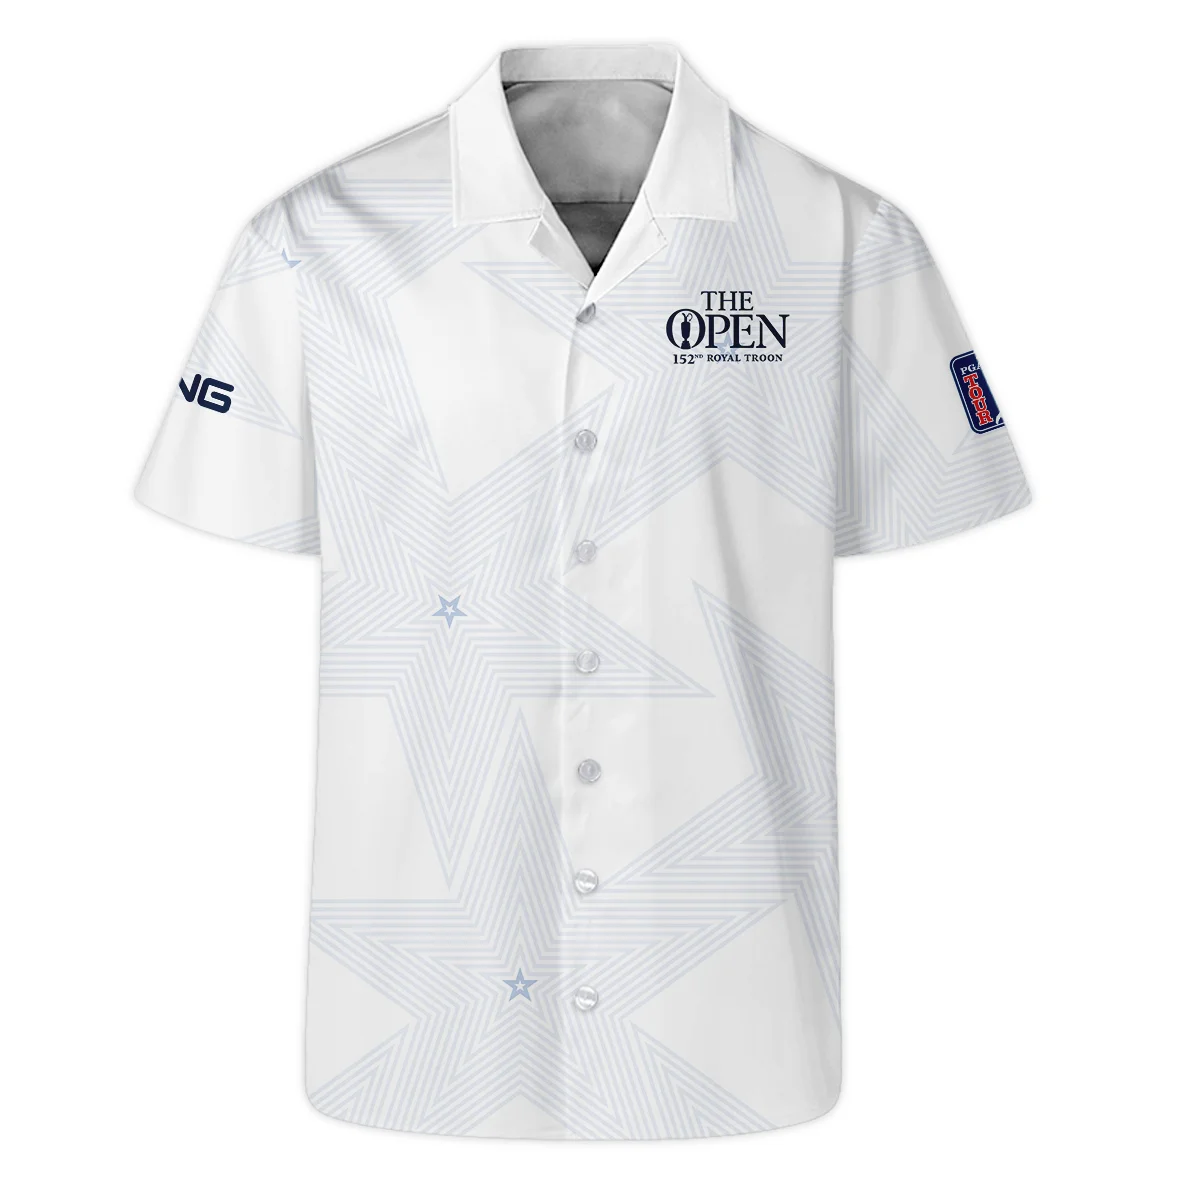 152nd The Open Championship Golf Ping Polo Shirt Stars White Navy Golf Sports All Over Print Polo Shirt For Men